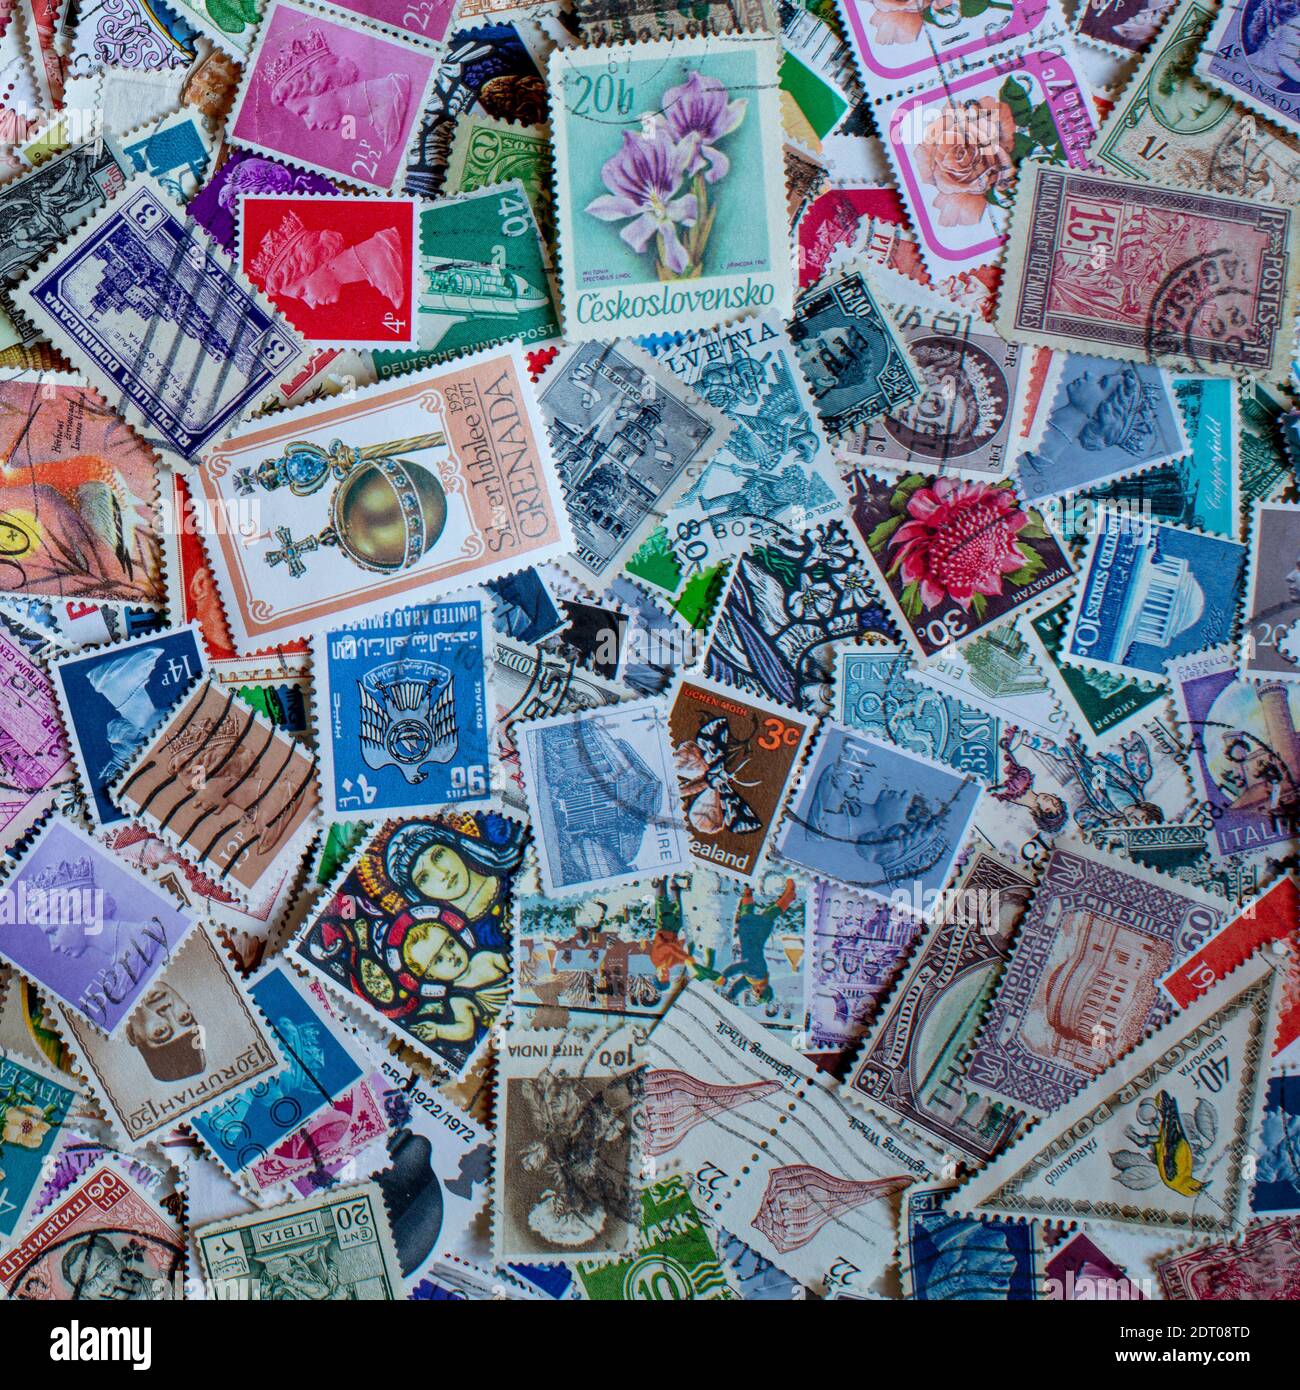 Display of international/world postage stamps as still-life collection Stock Photo